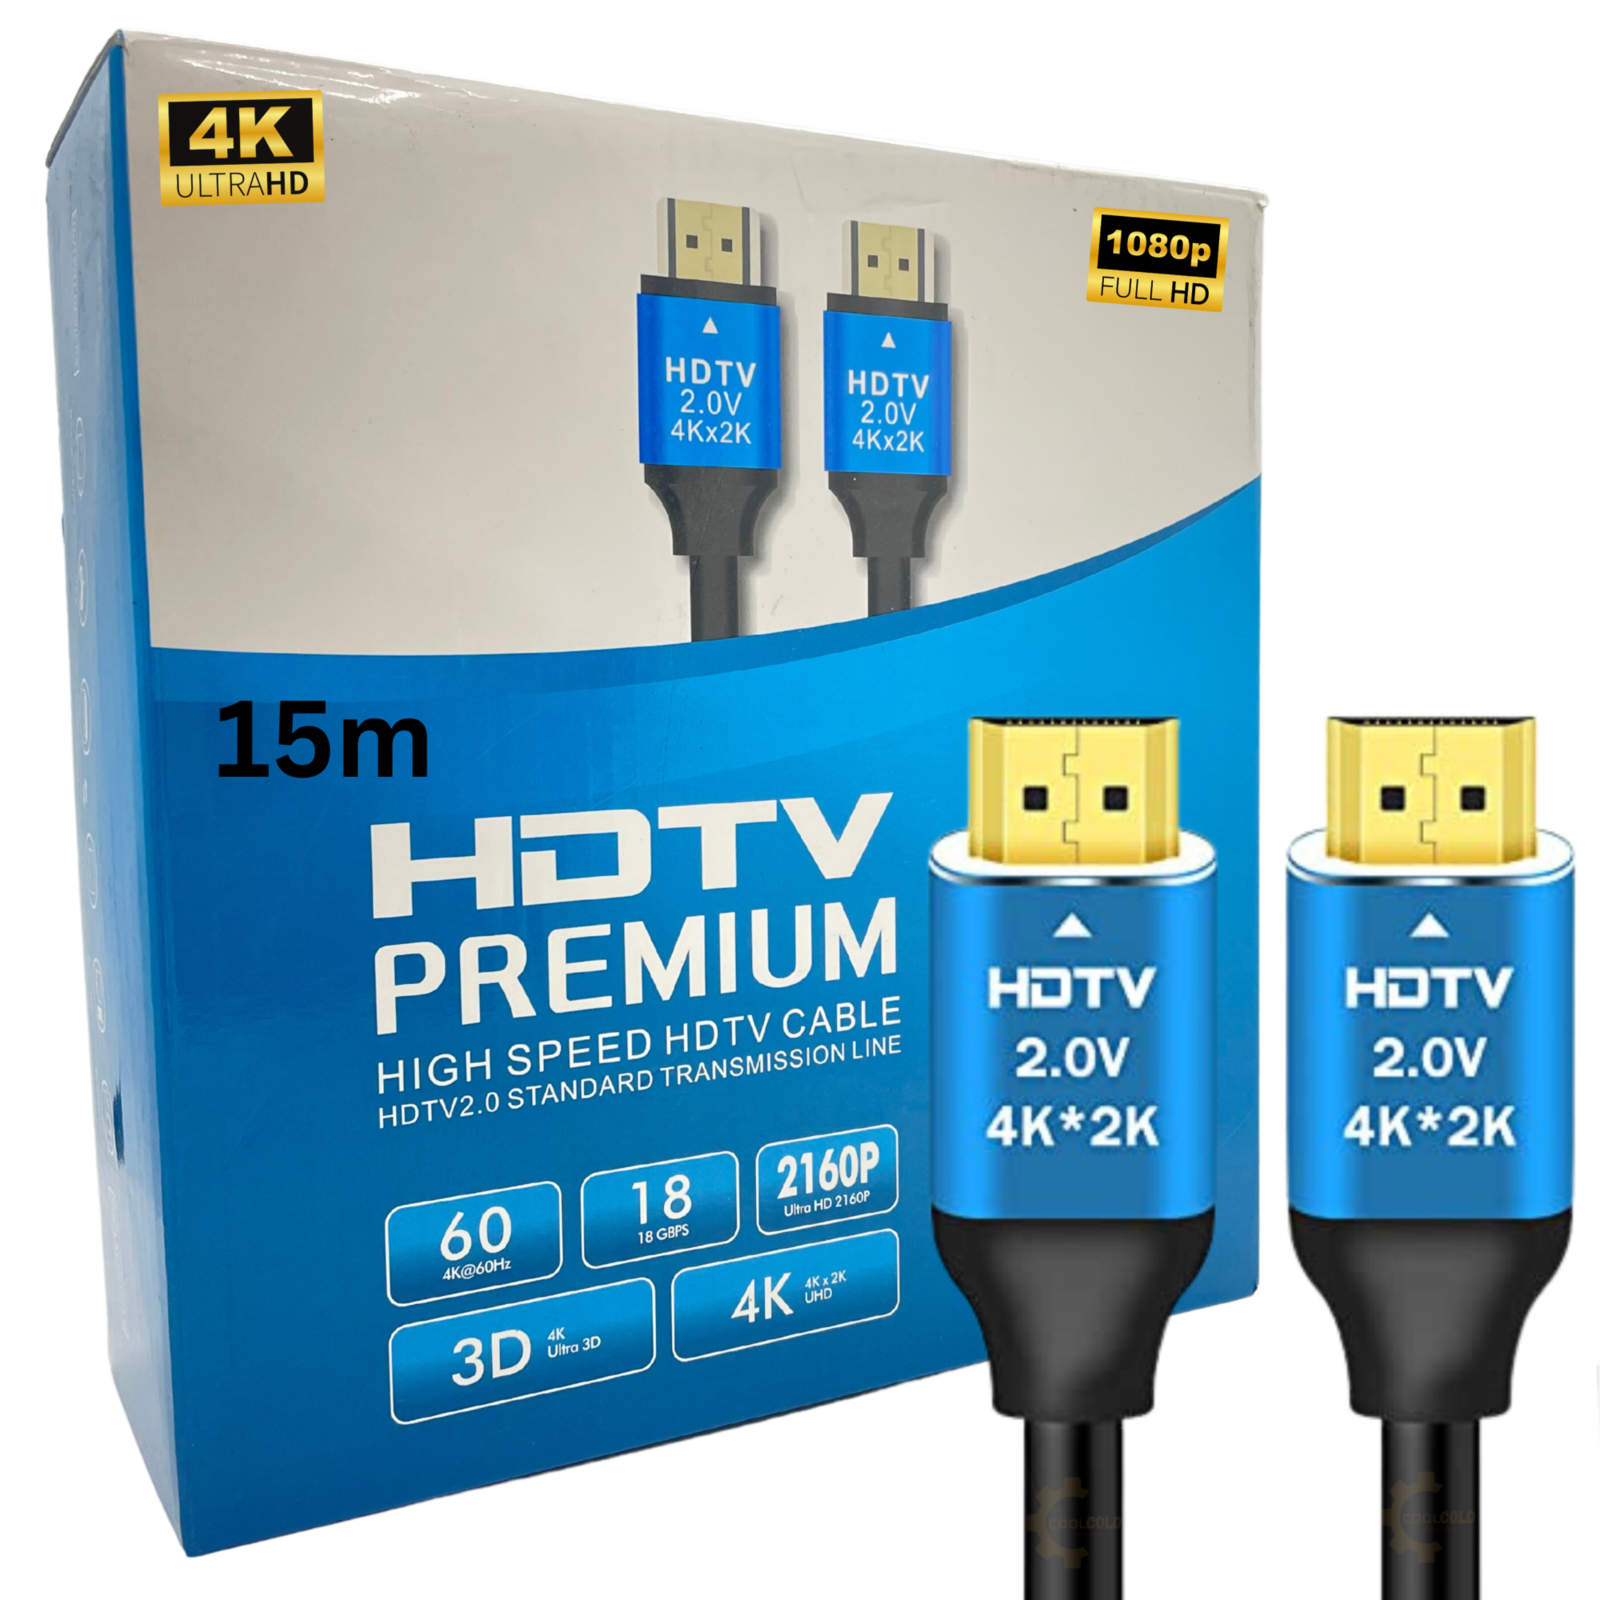 CABLE HDMI 15M 4K PREMIUM 2.0V - HDR & HIGH SPEED